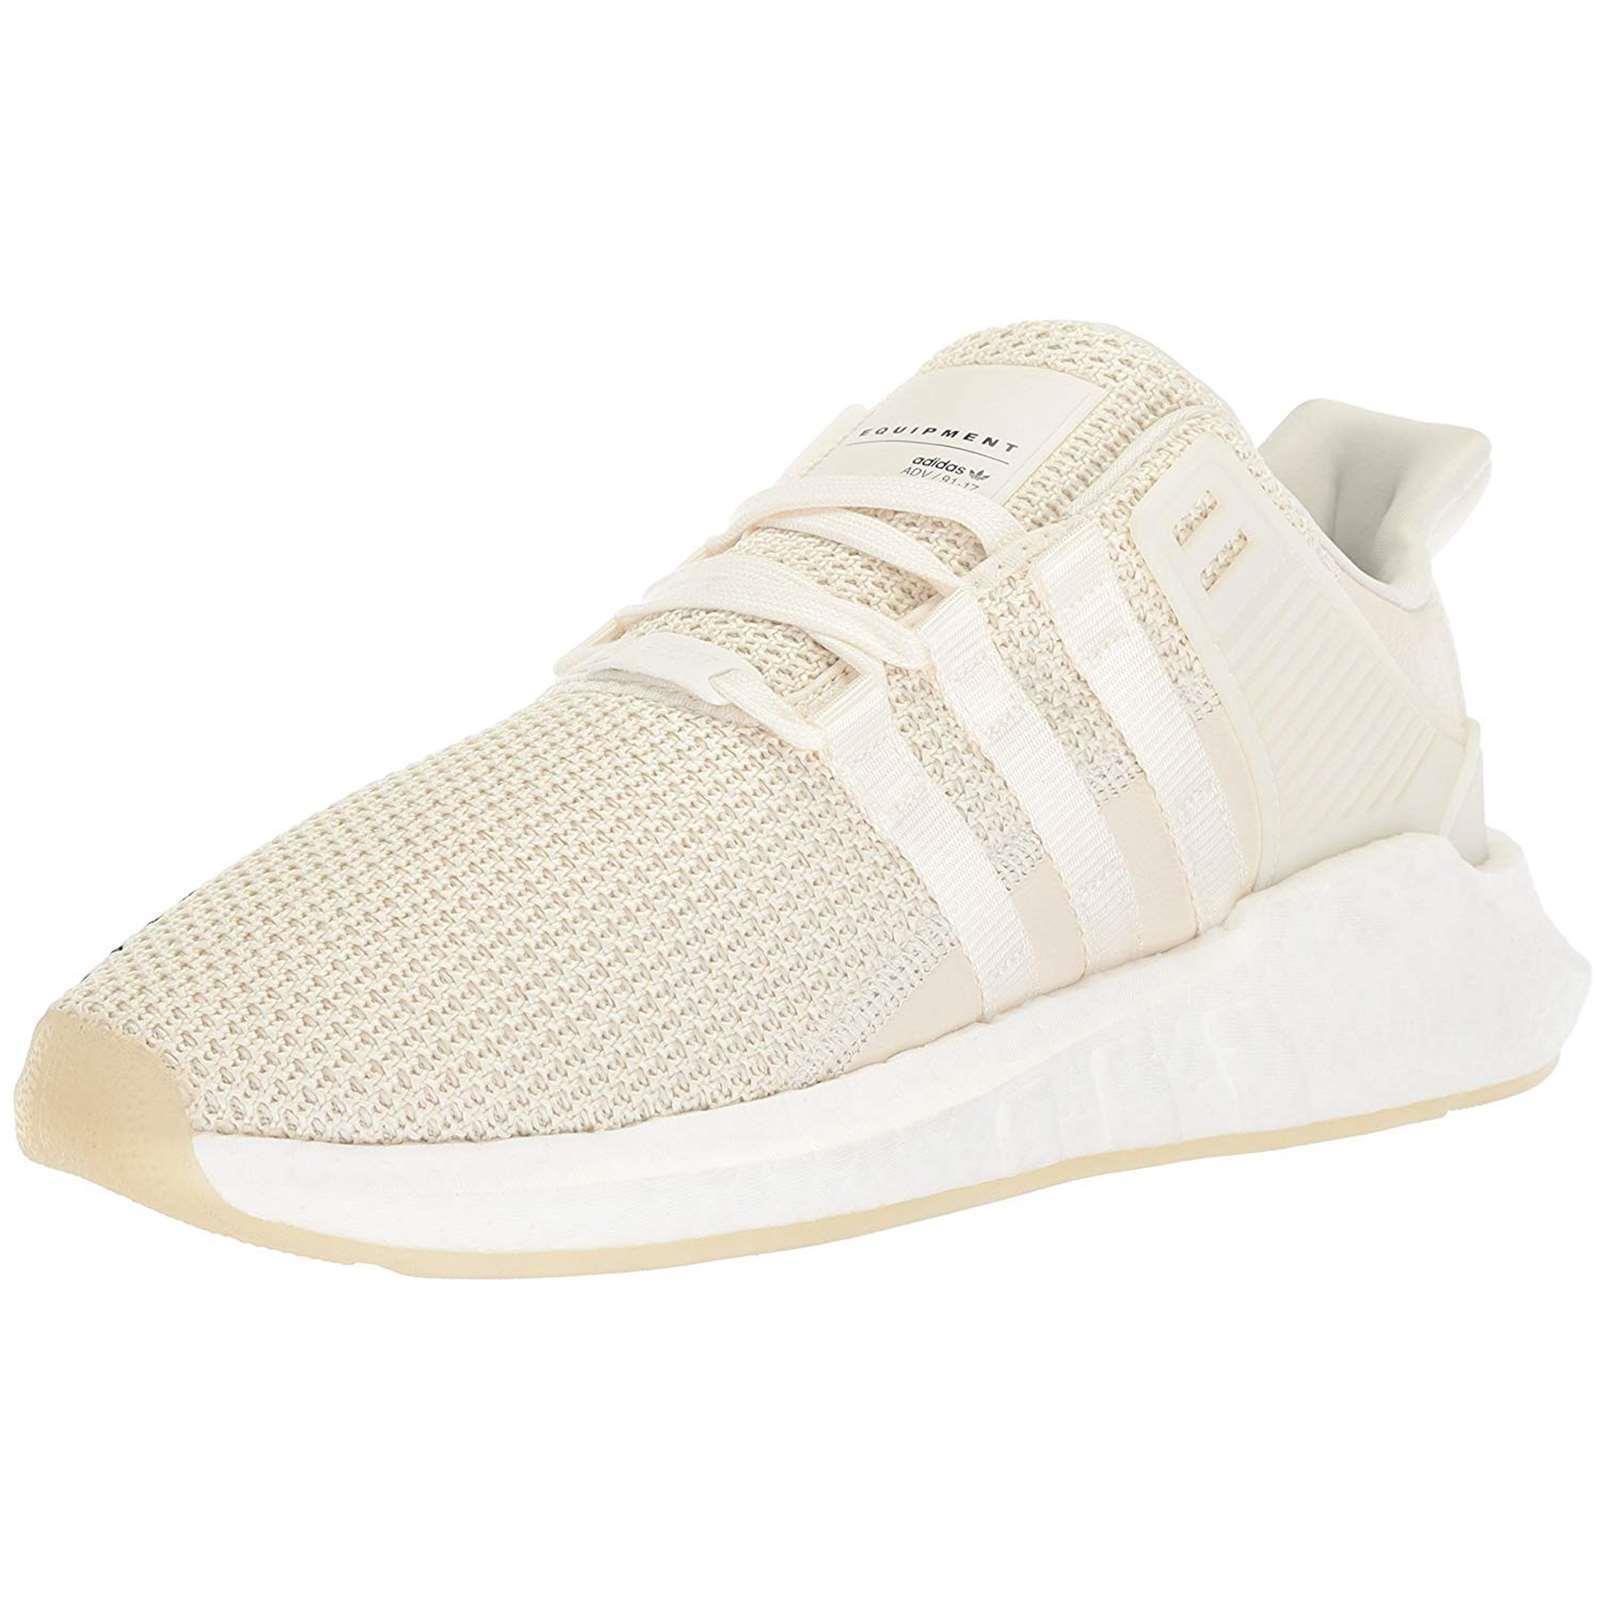 Adidas Men Athletic Shoes Eqt Support 93/17 Running Sneakers Training Shoes White